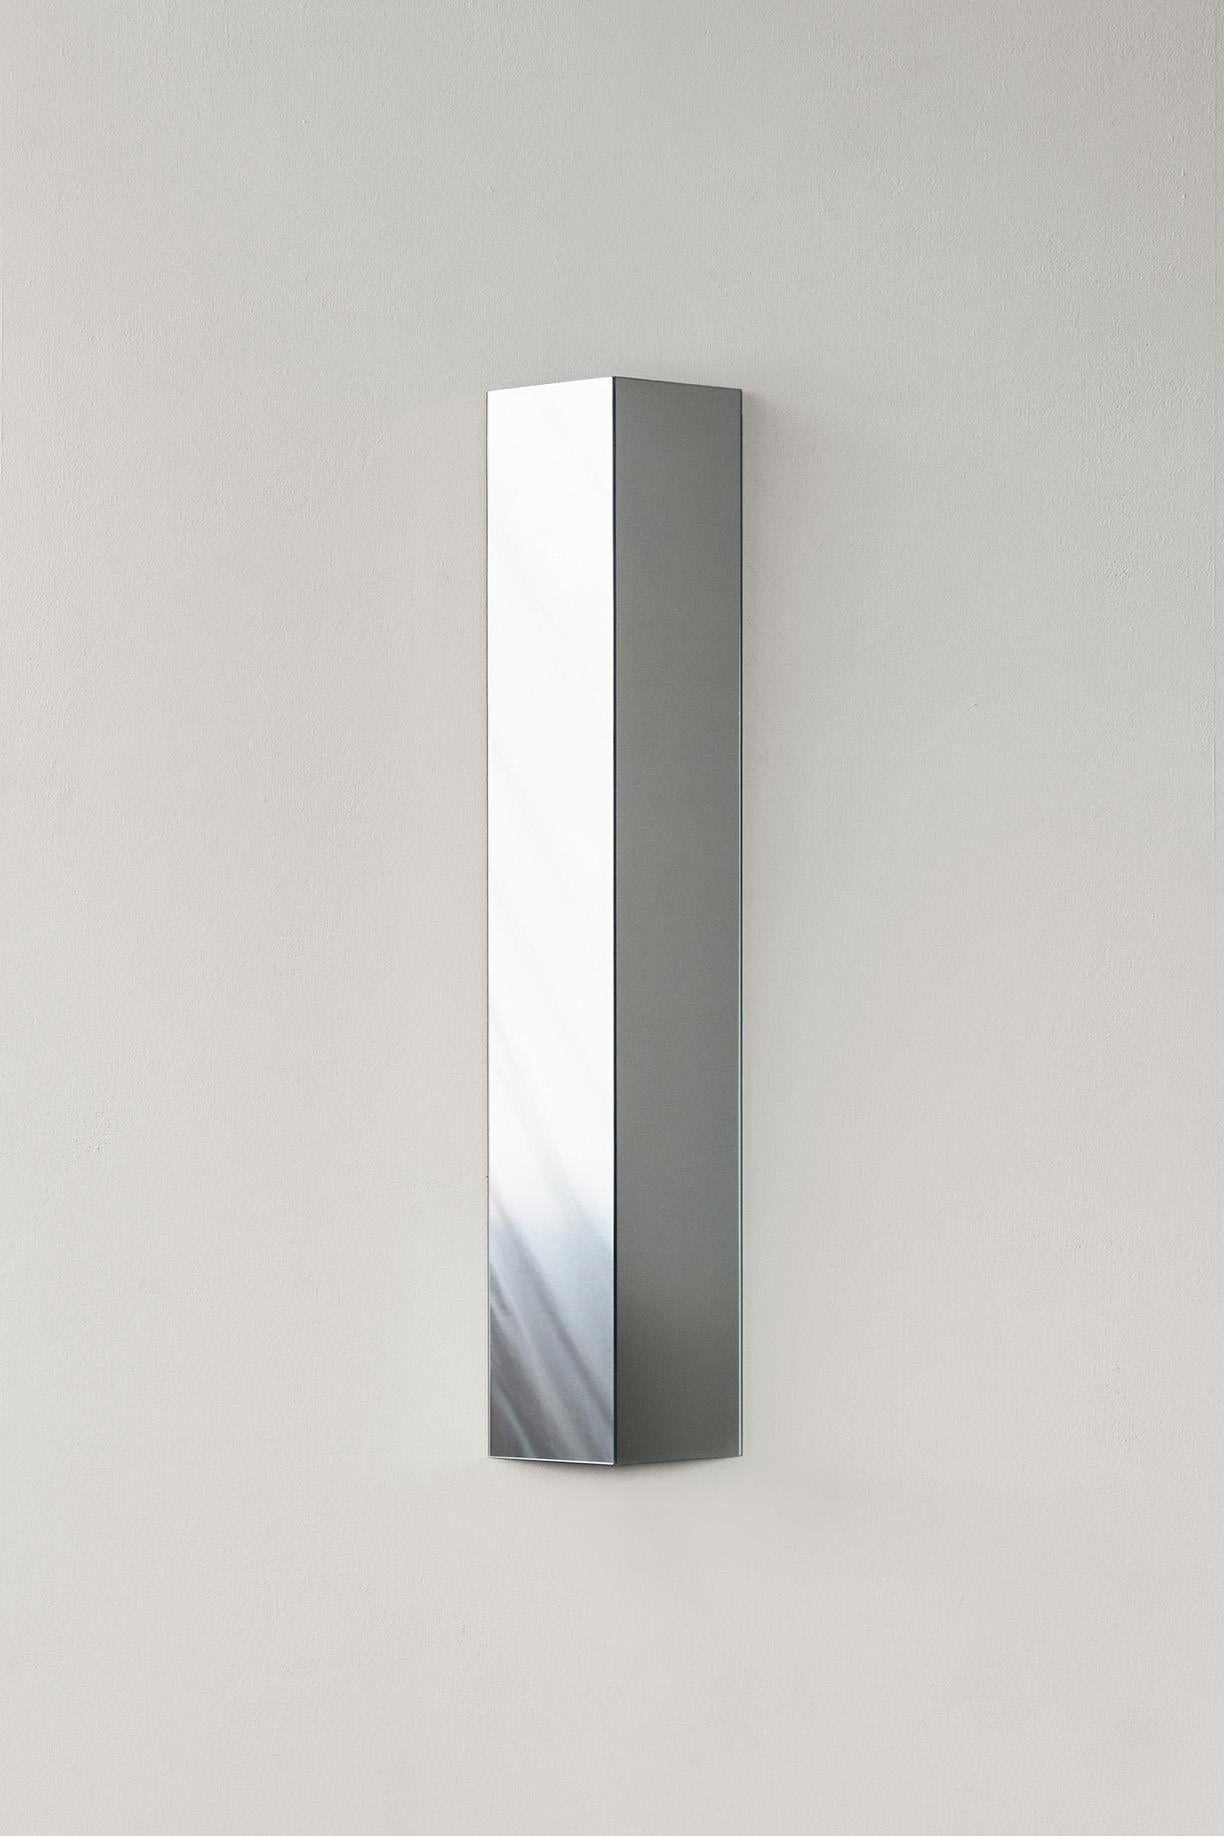 Minimalist View Shard Mirrored Glass Wall Sconce by Caroline Chao 'Plug-In Version' For Sale